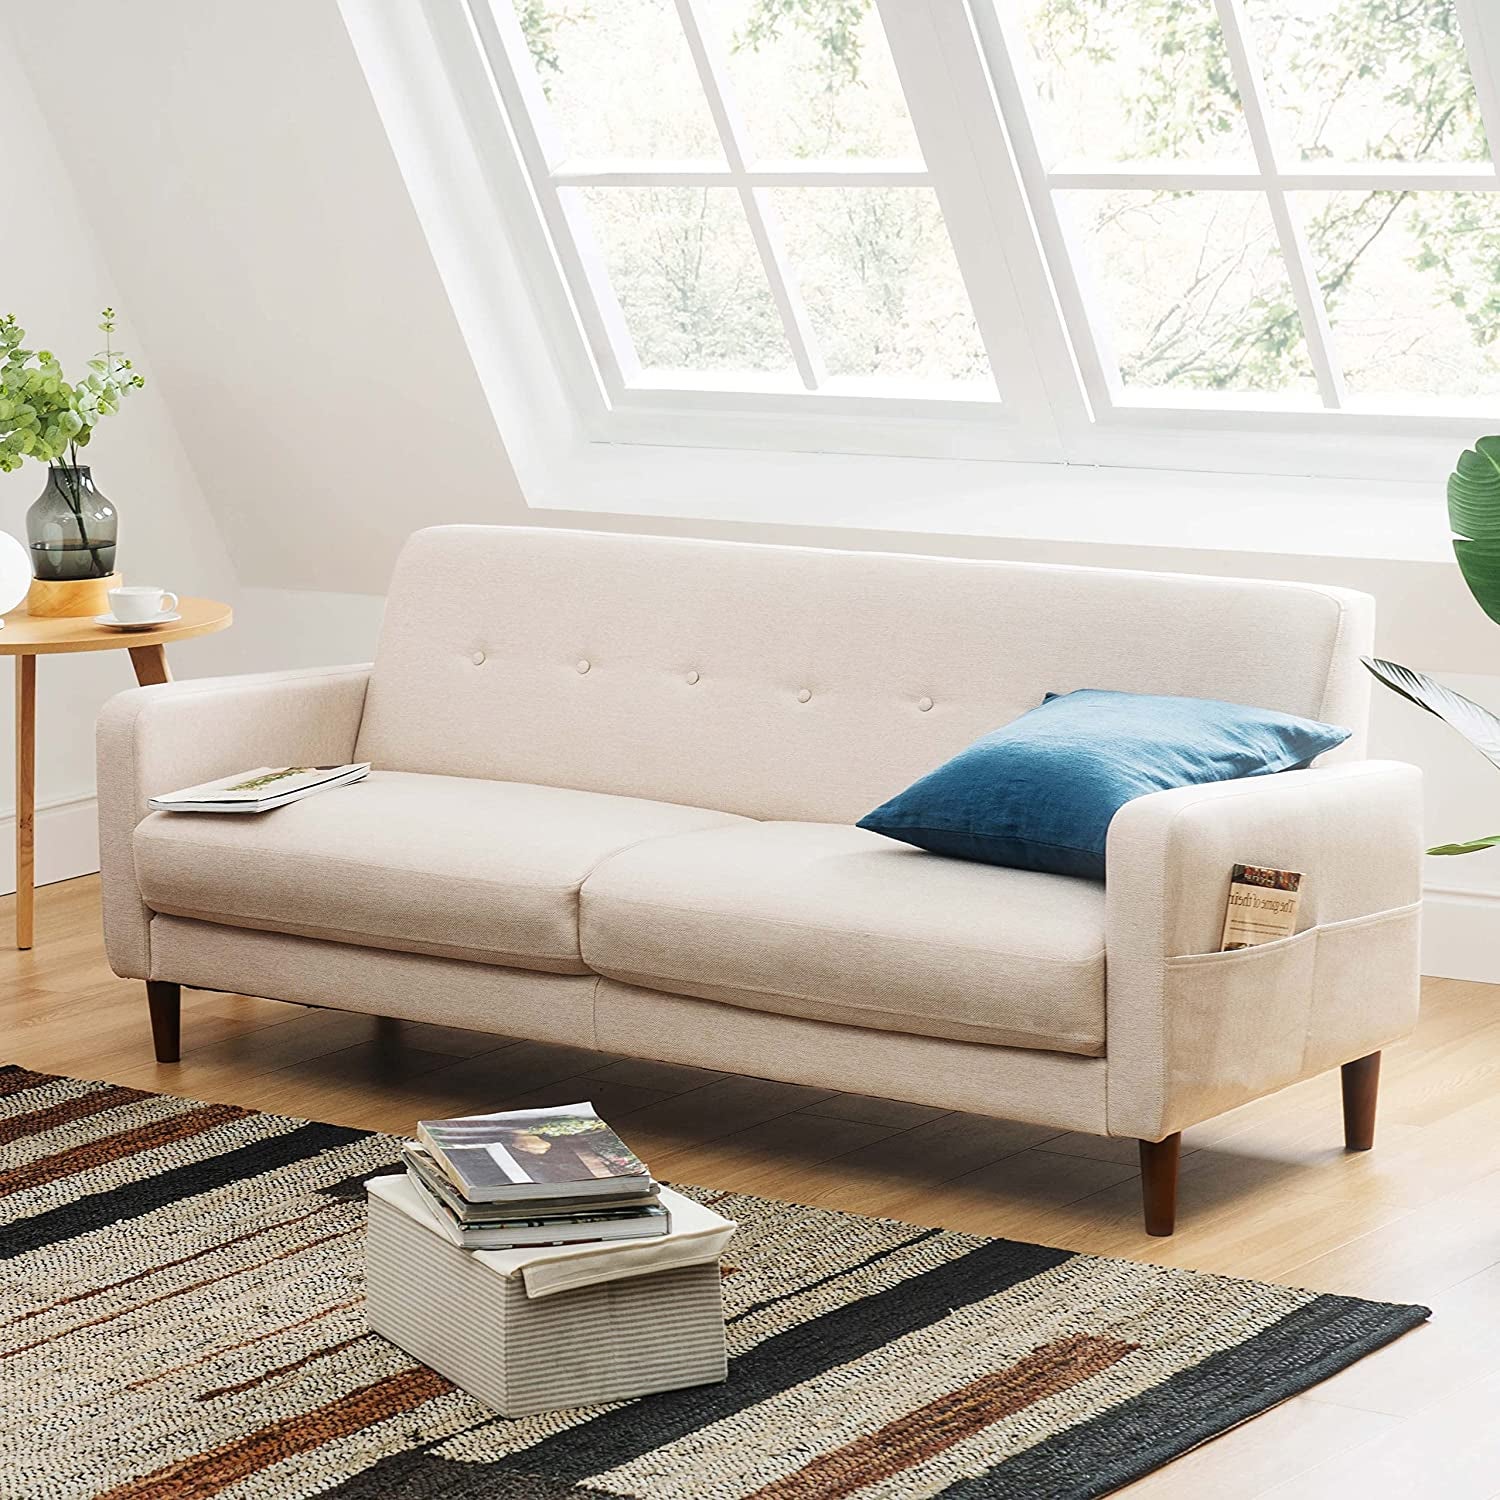 the small cream-colored sofa with armrest pockets